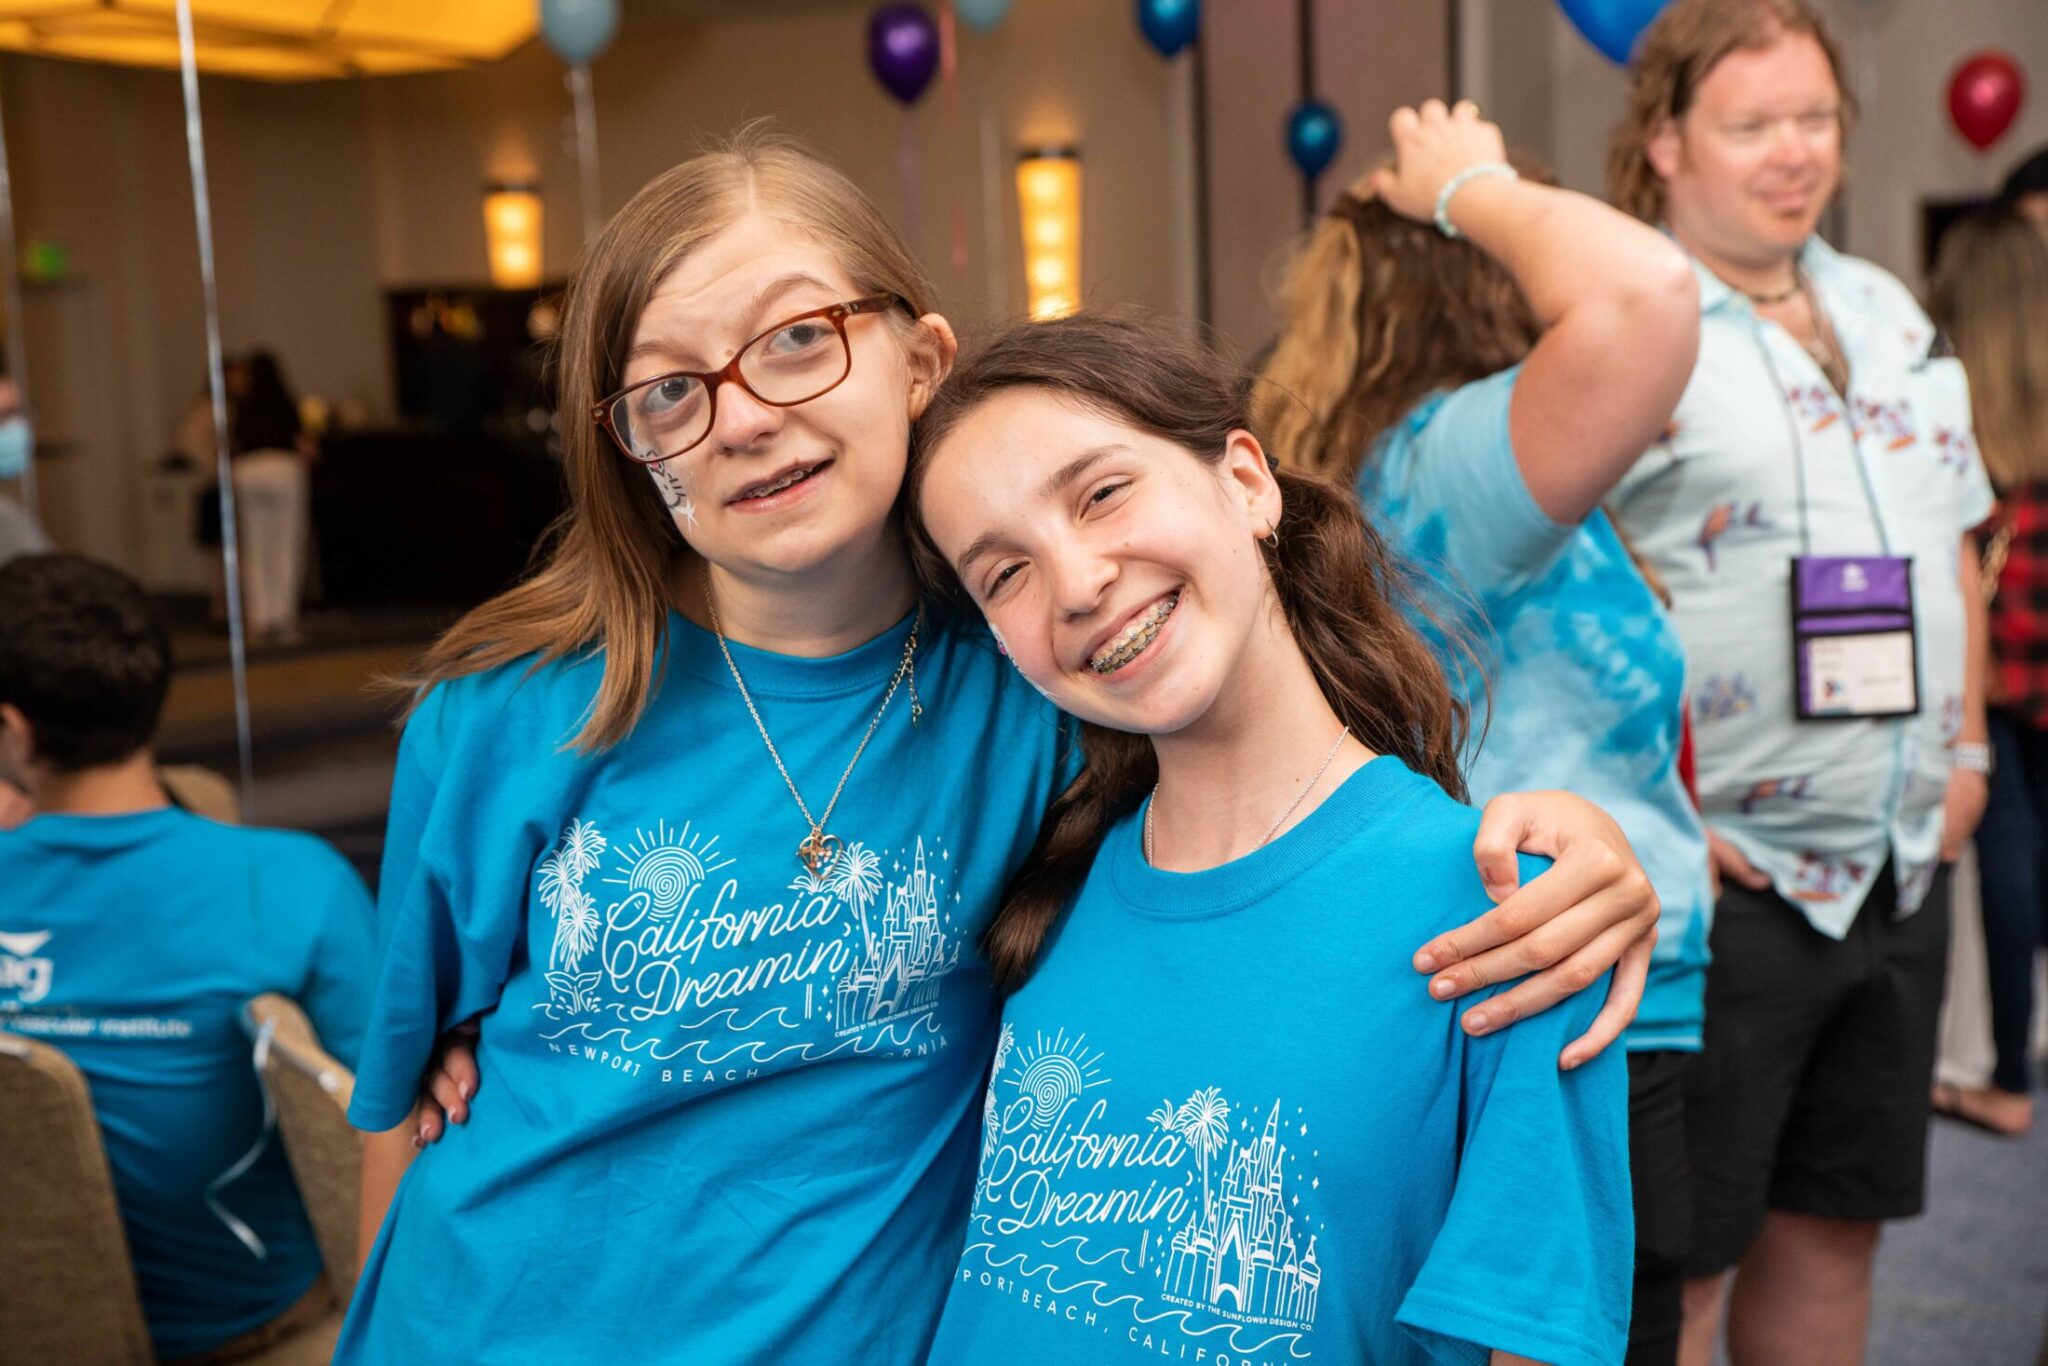 Registration is Open for The Marfan Foundation’s 39th Conference in